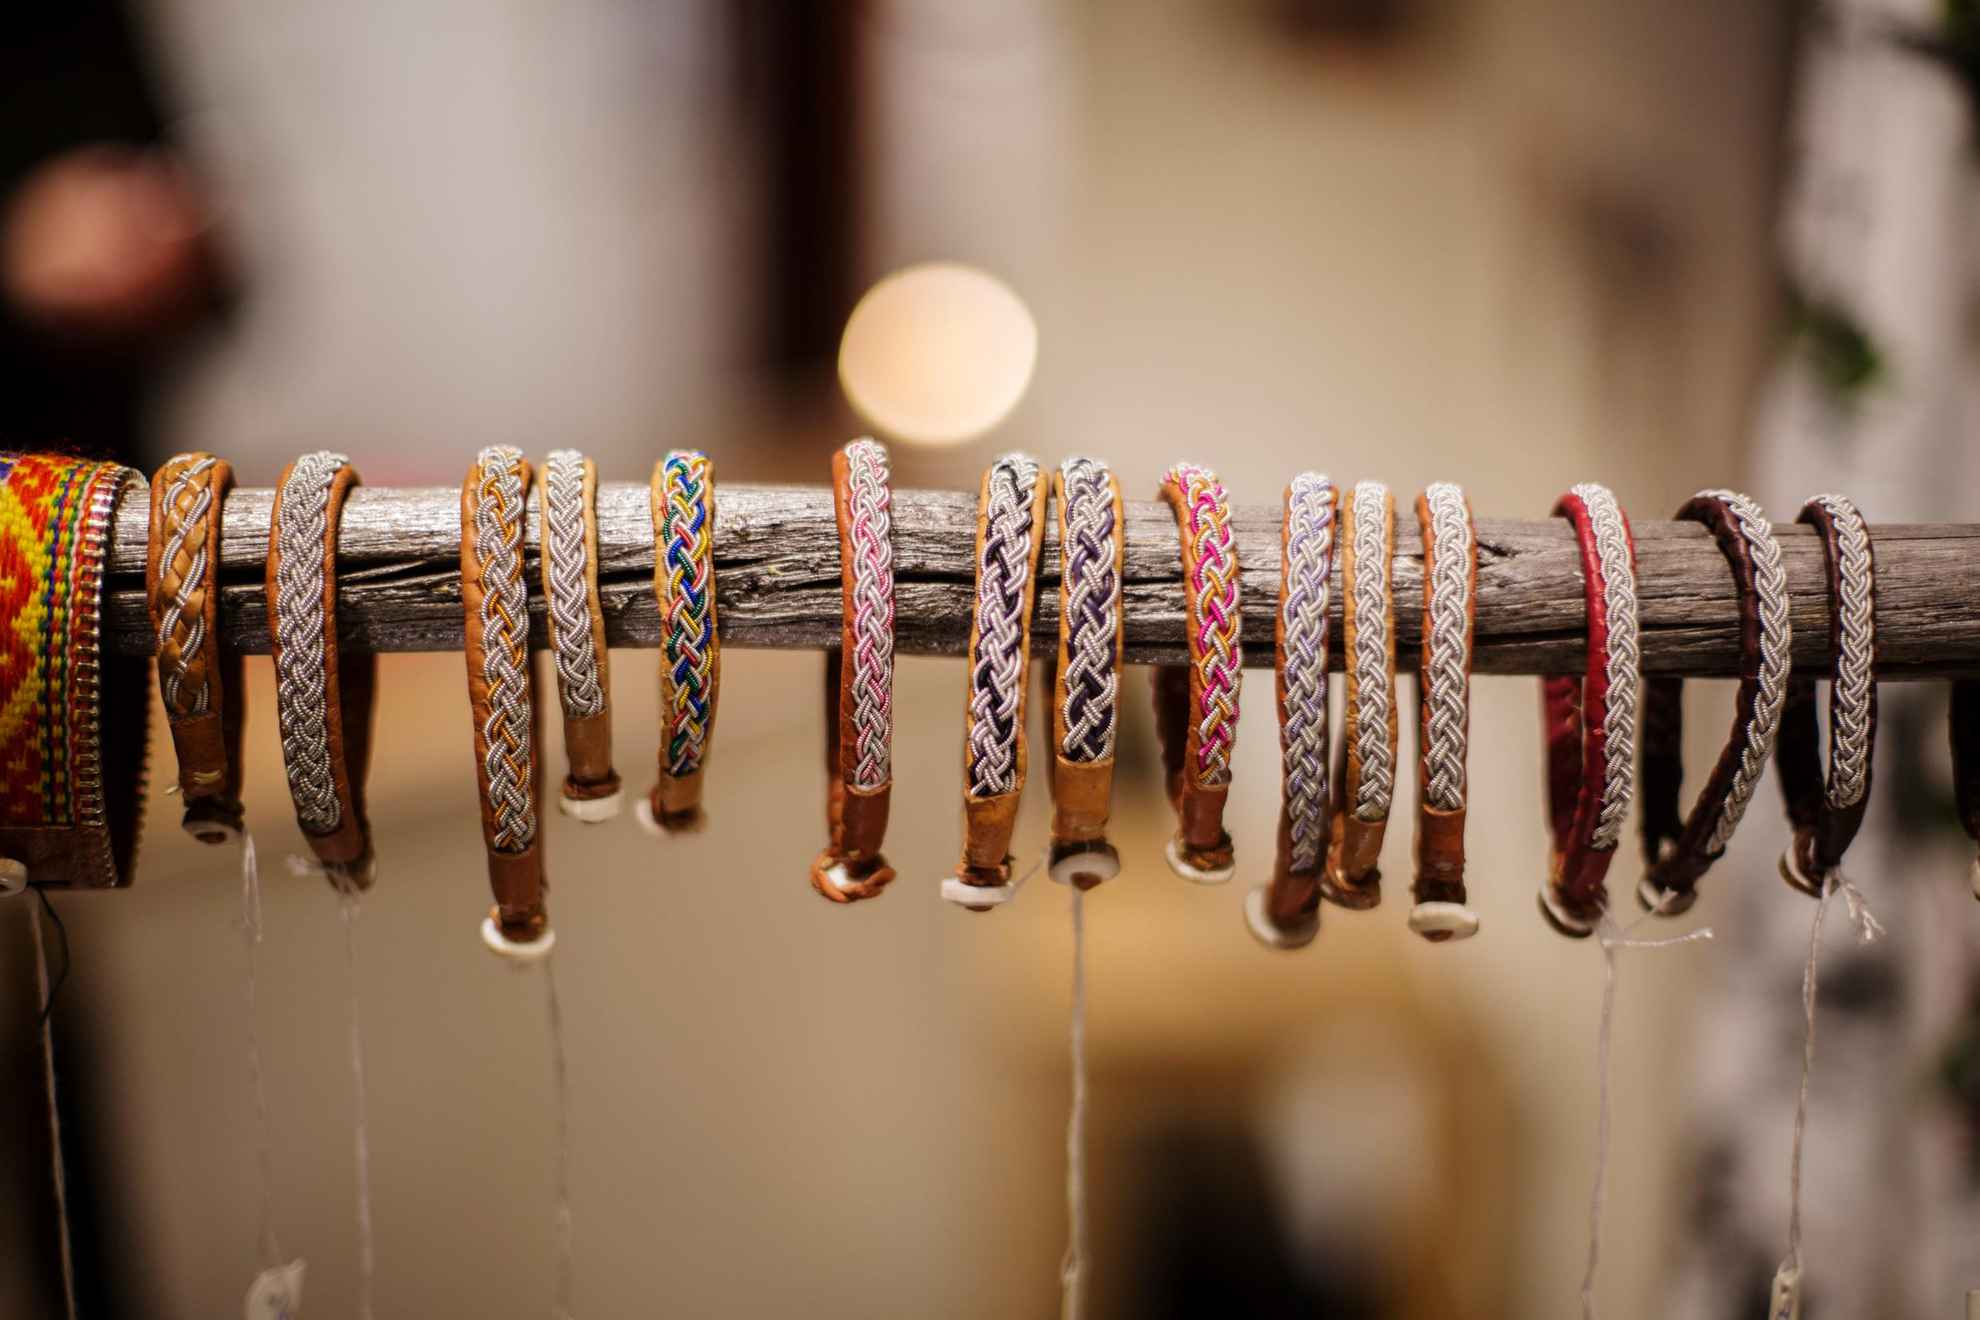 Numerous bracelets made of reindeer leather and tin thread, hanging on a long stick.